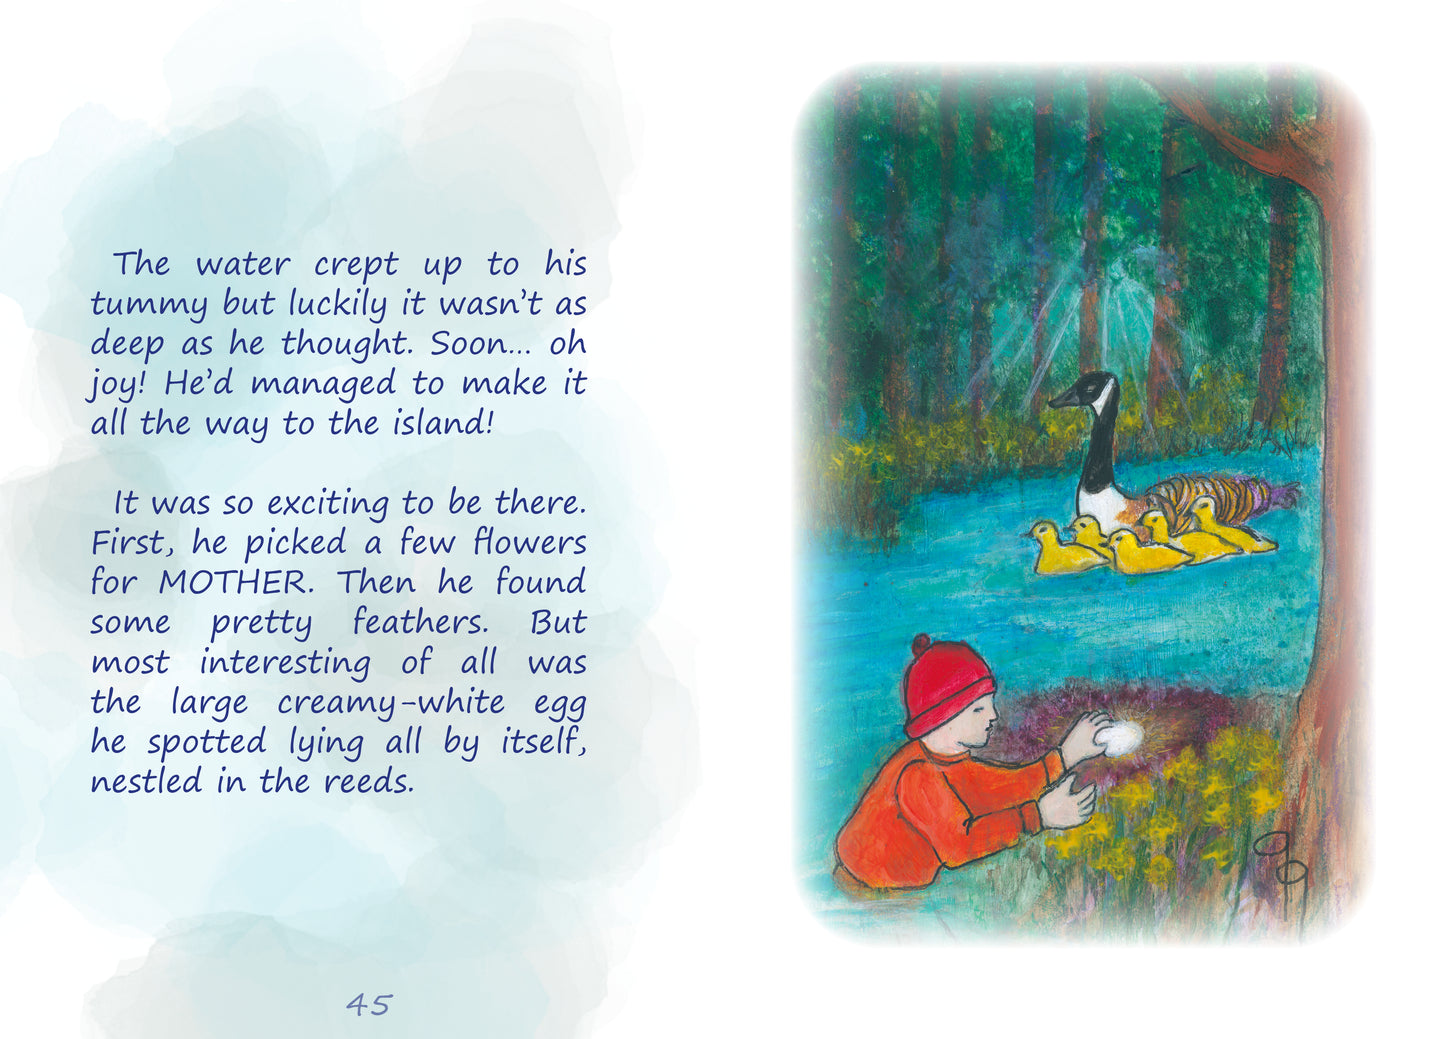 REDCAP | Written by June Mari Louise Lipka, illustrated by Ginger Gilmour